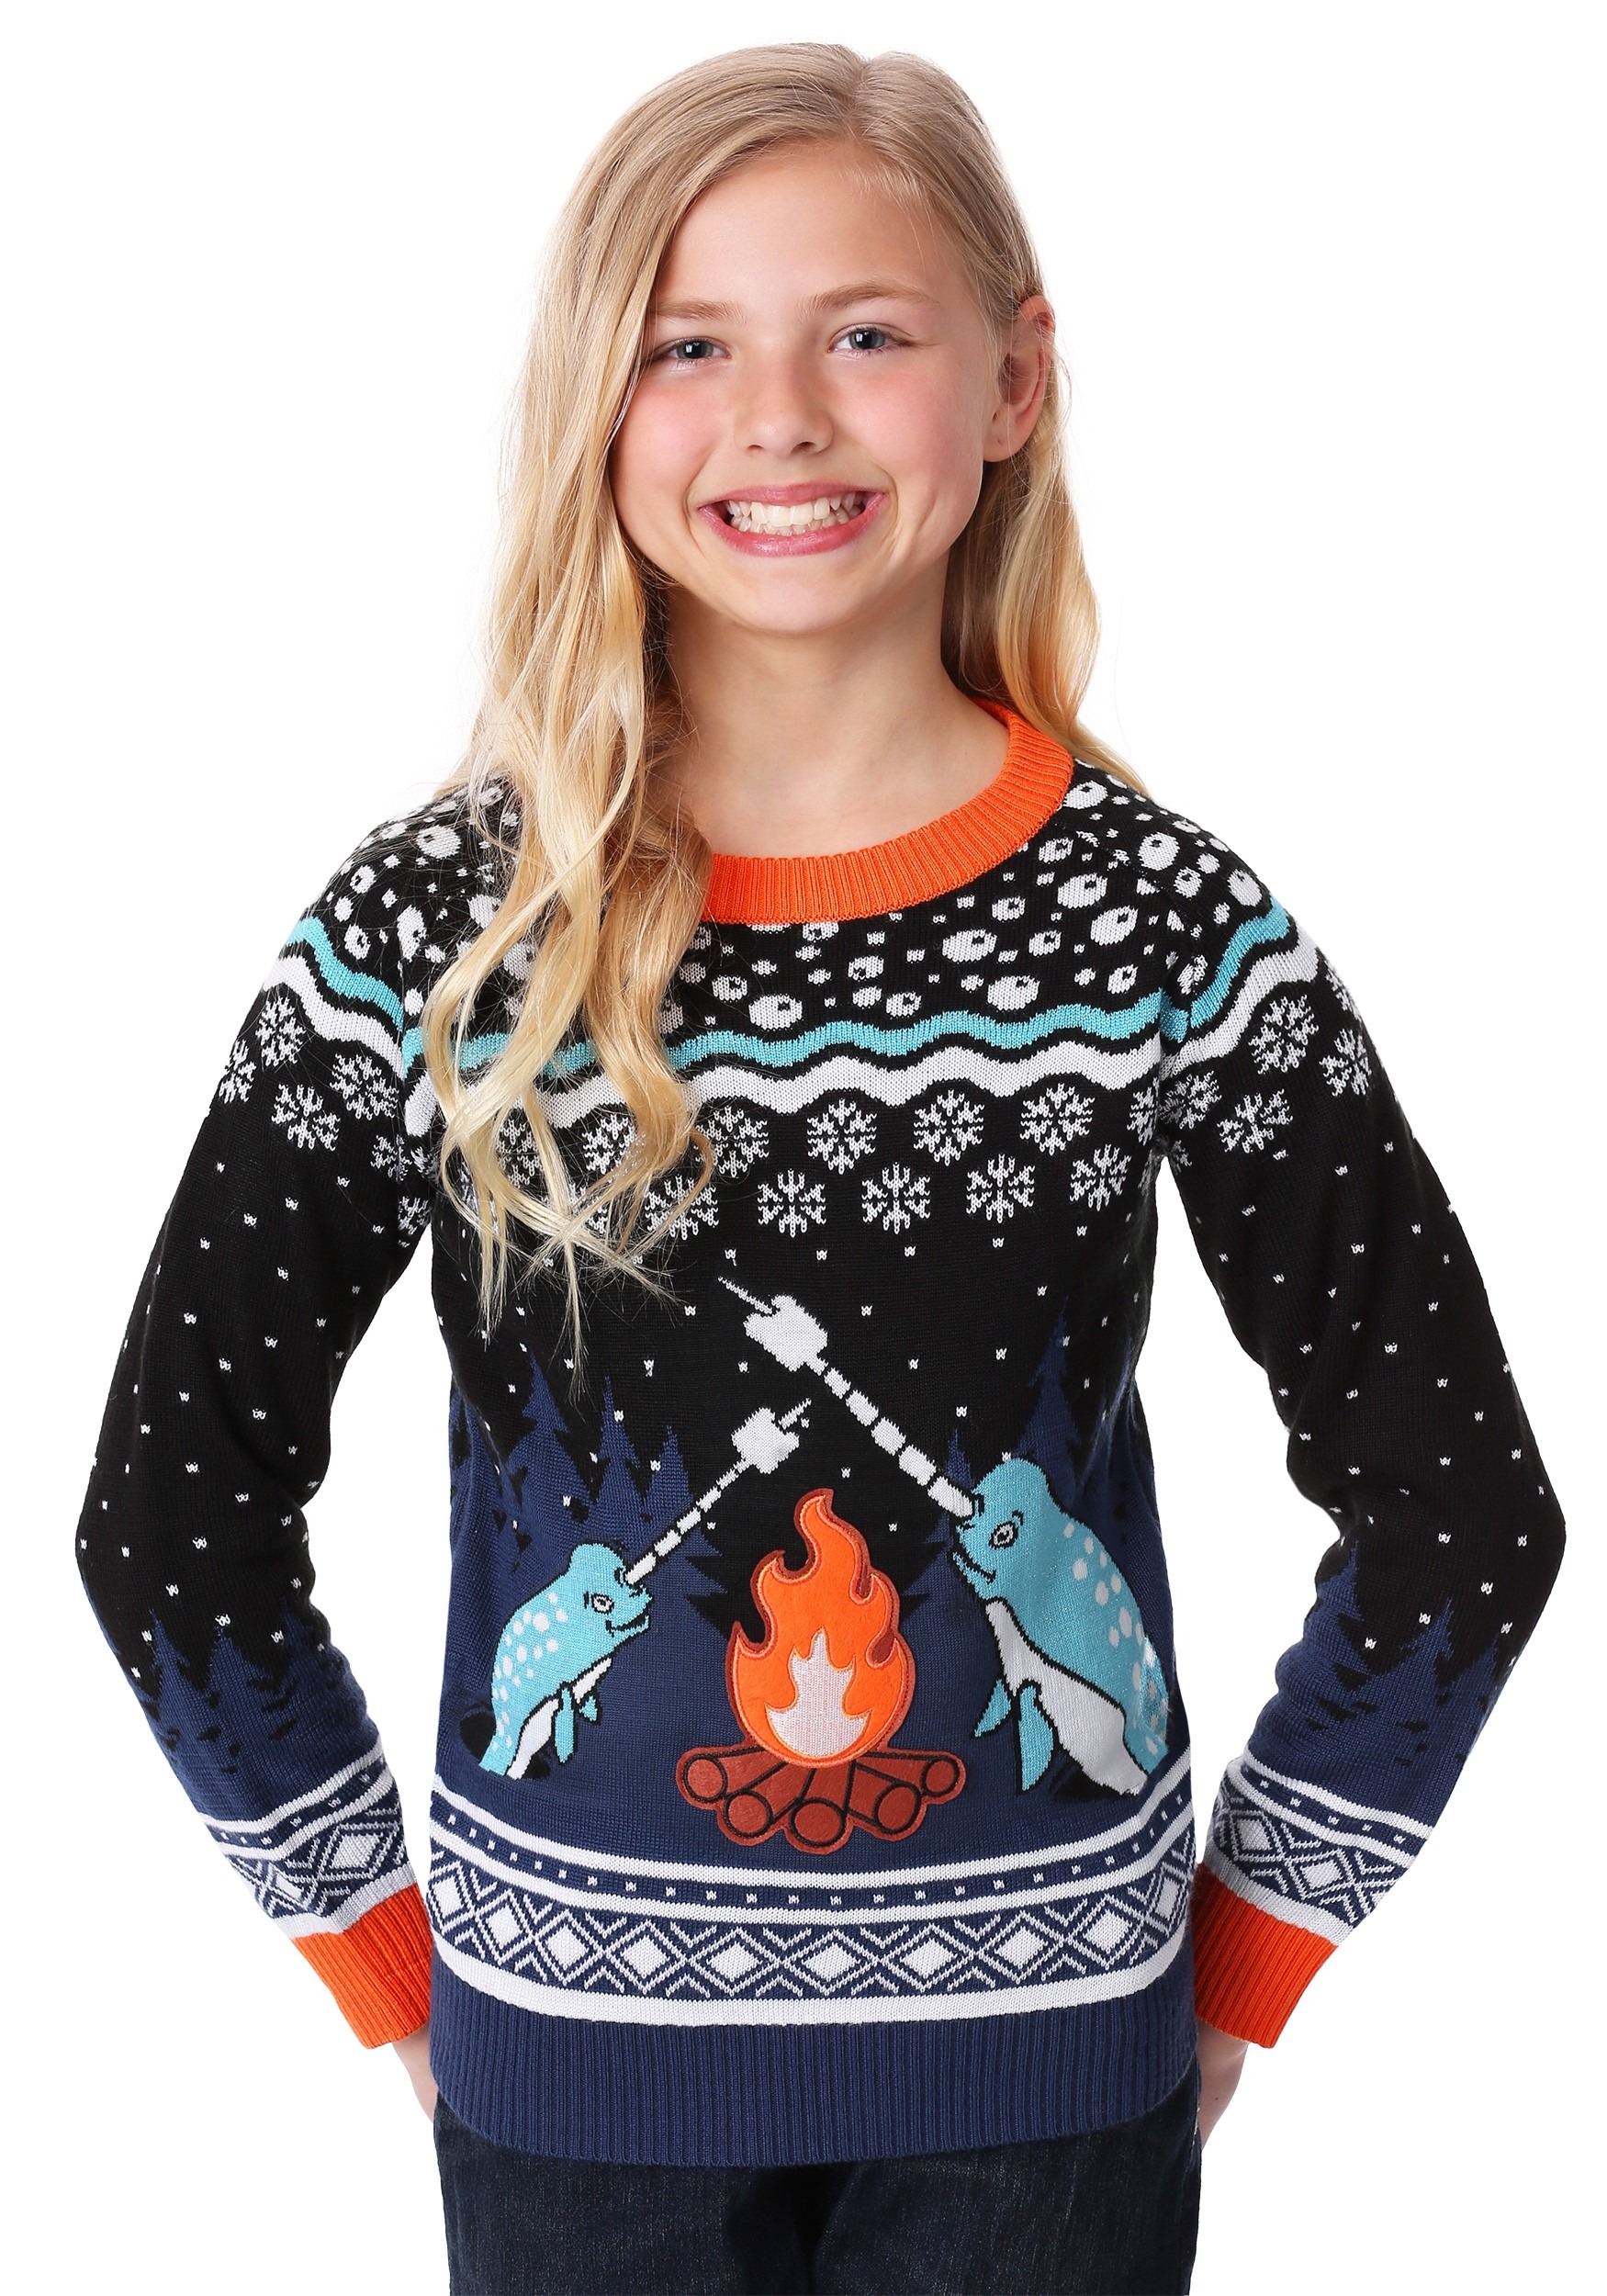 Narwhal Child Ugly Christmas Sweater